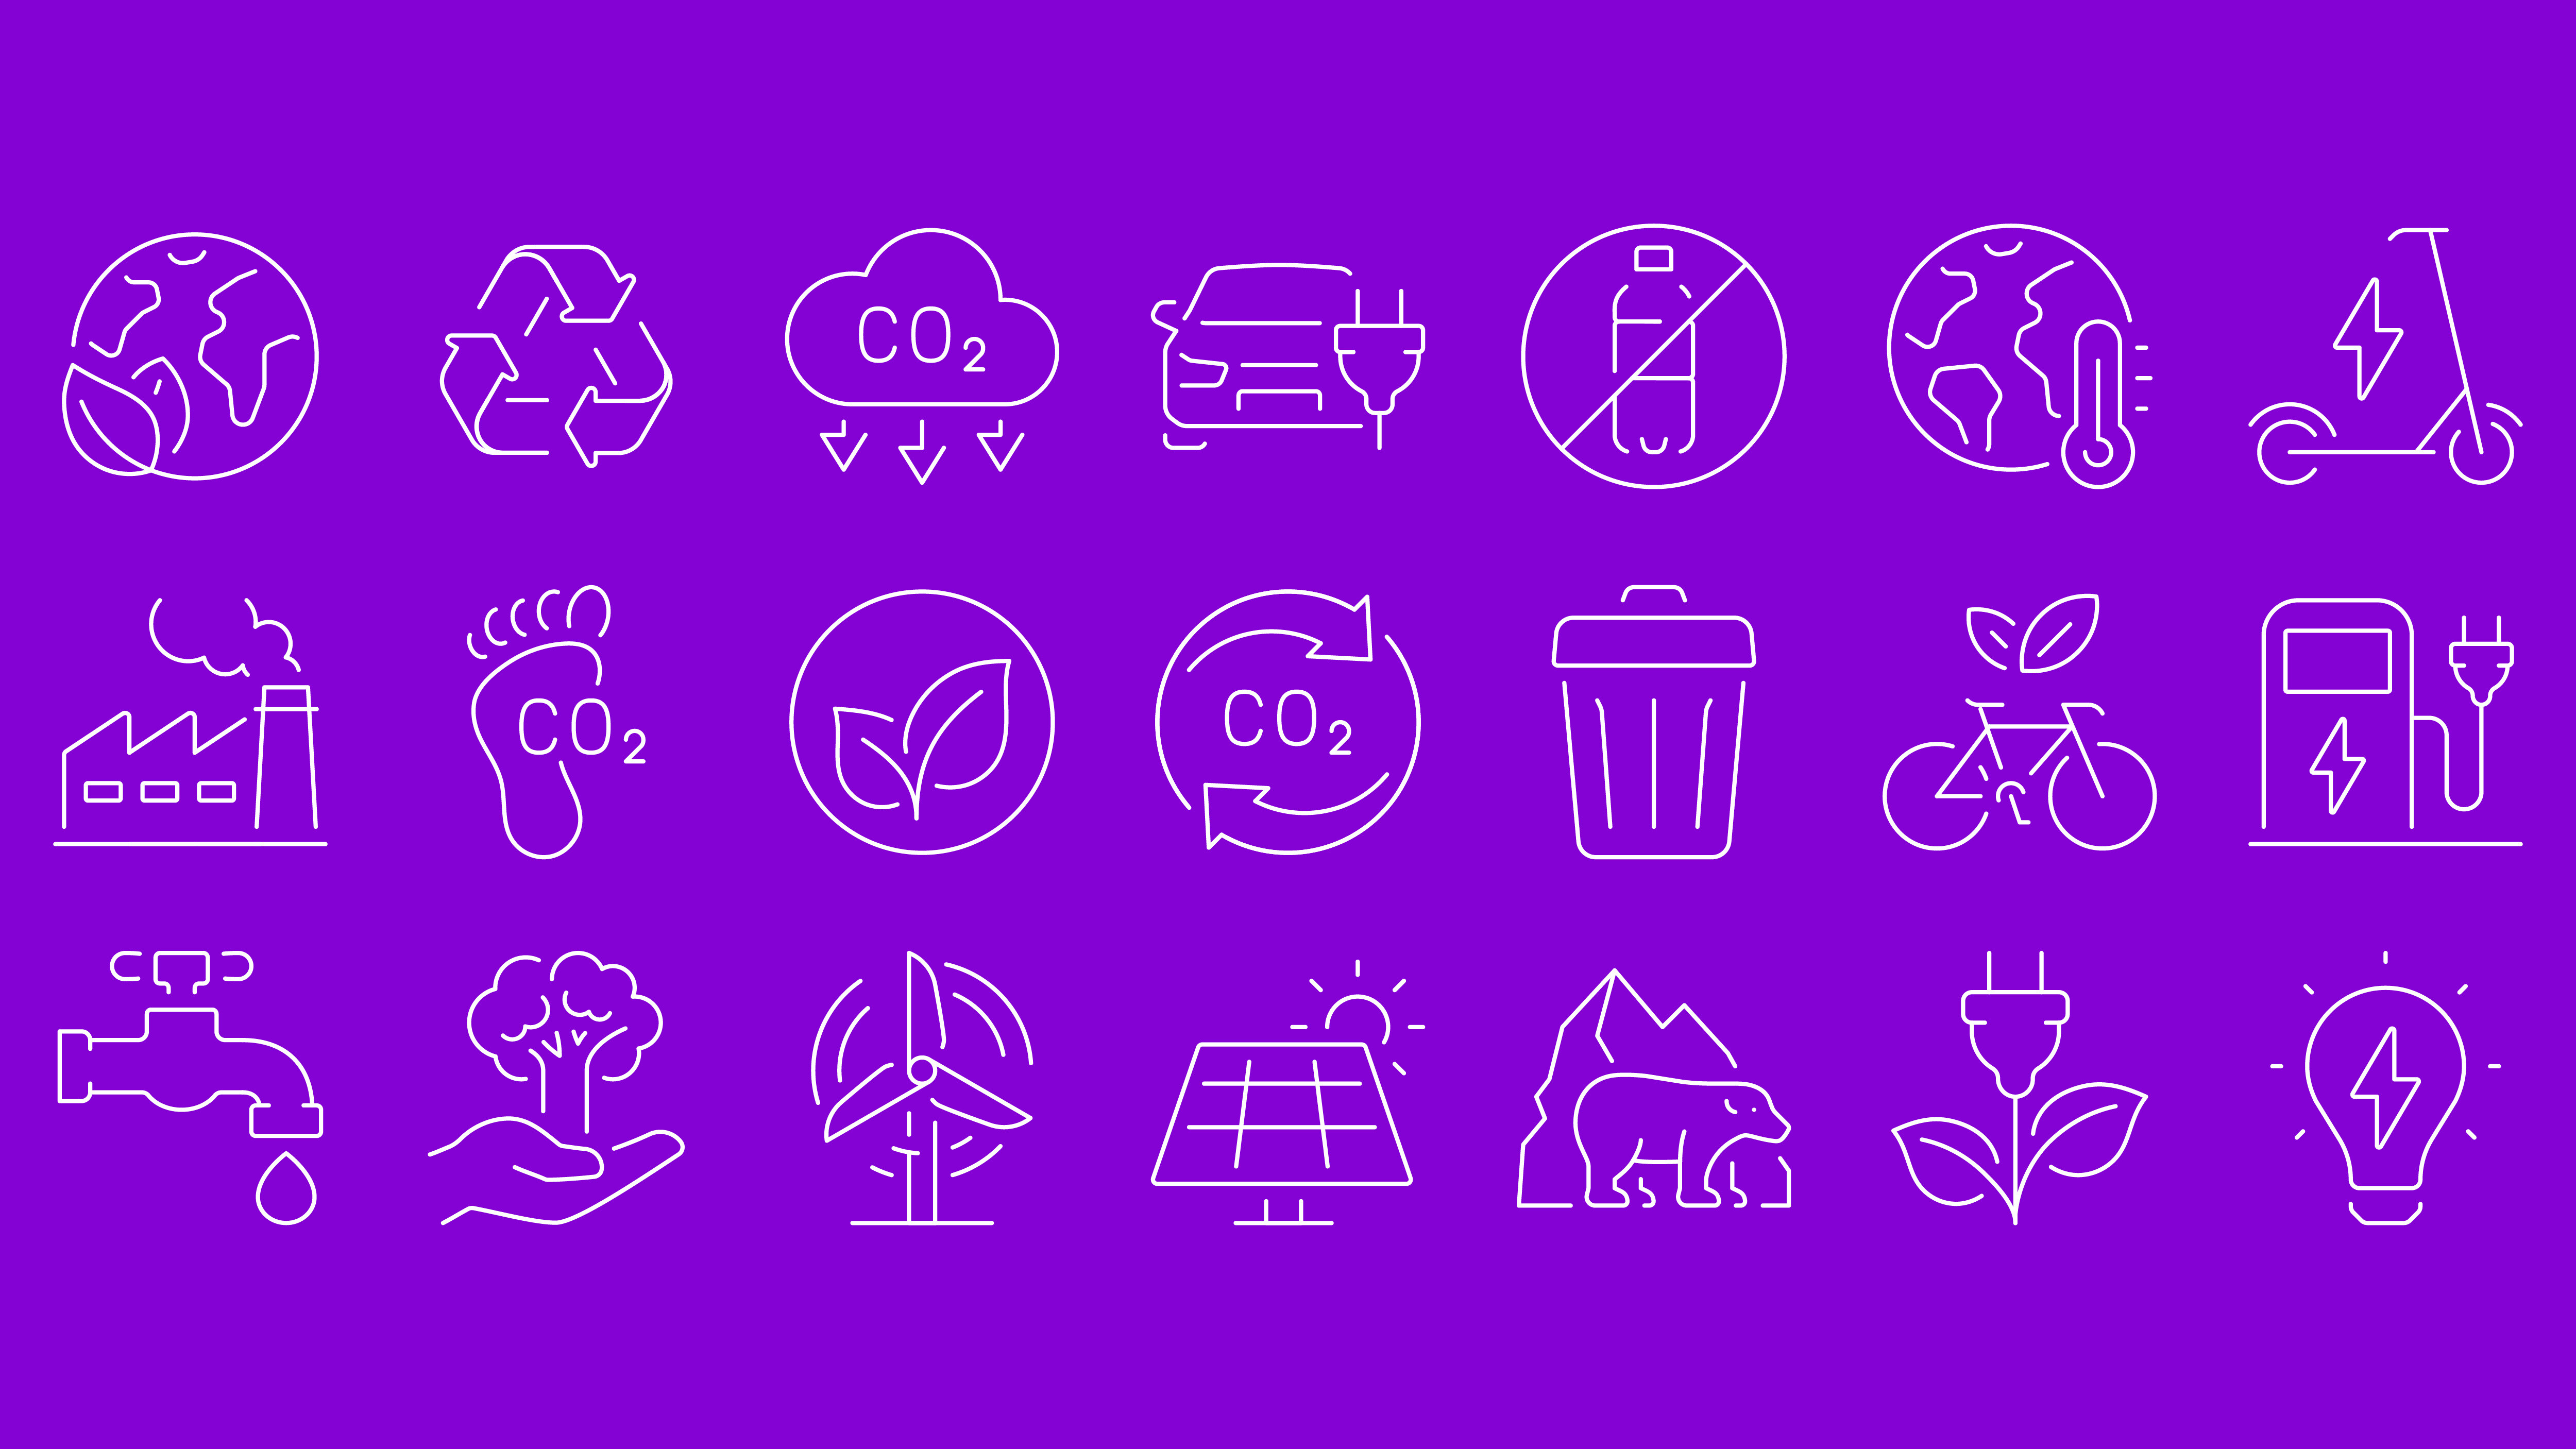 Carbon footprint, CO2 neutral, net zero, sustainable development white outline icons on a purple background.